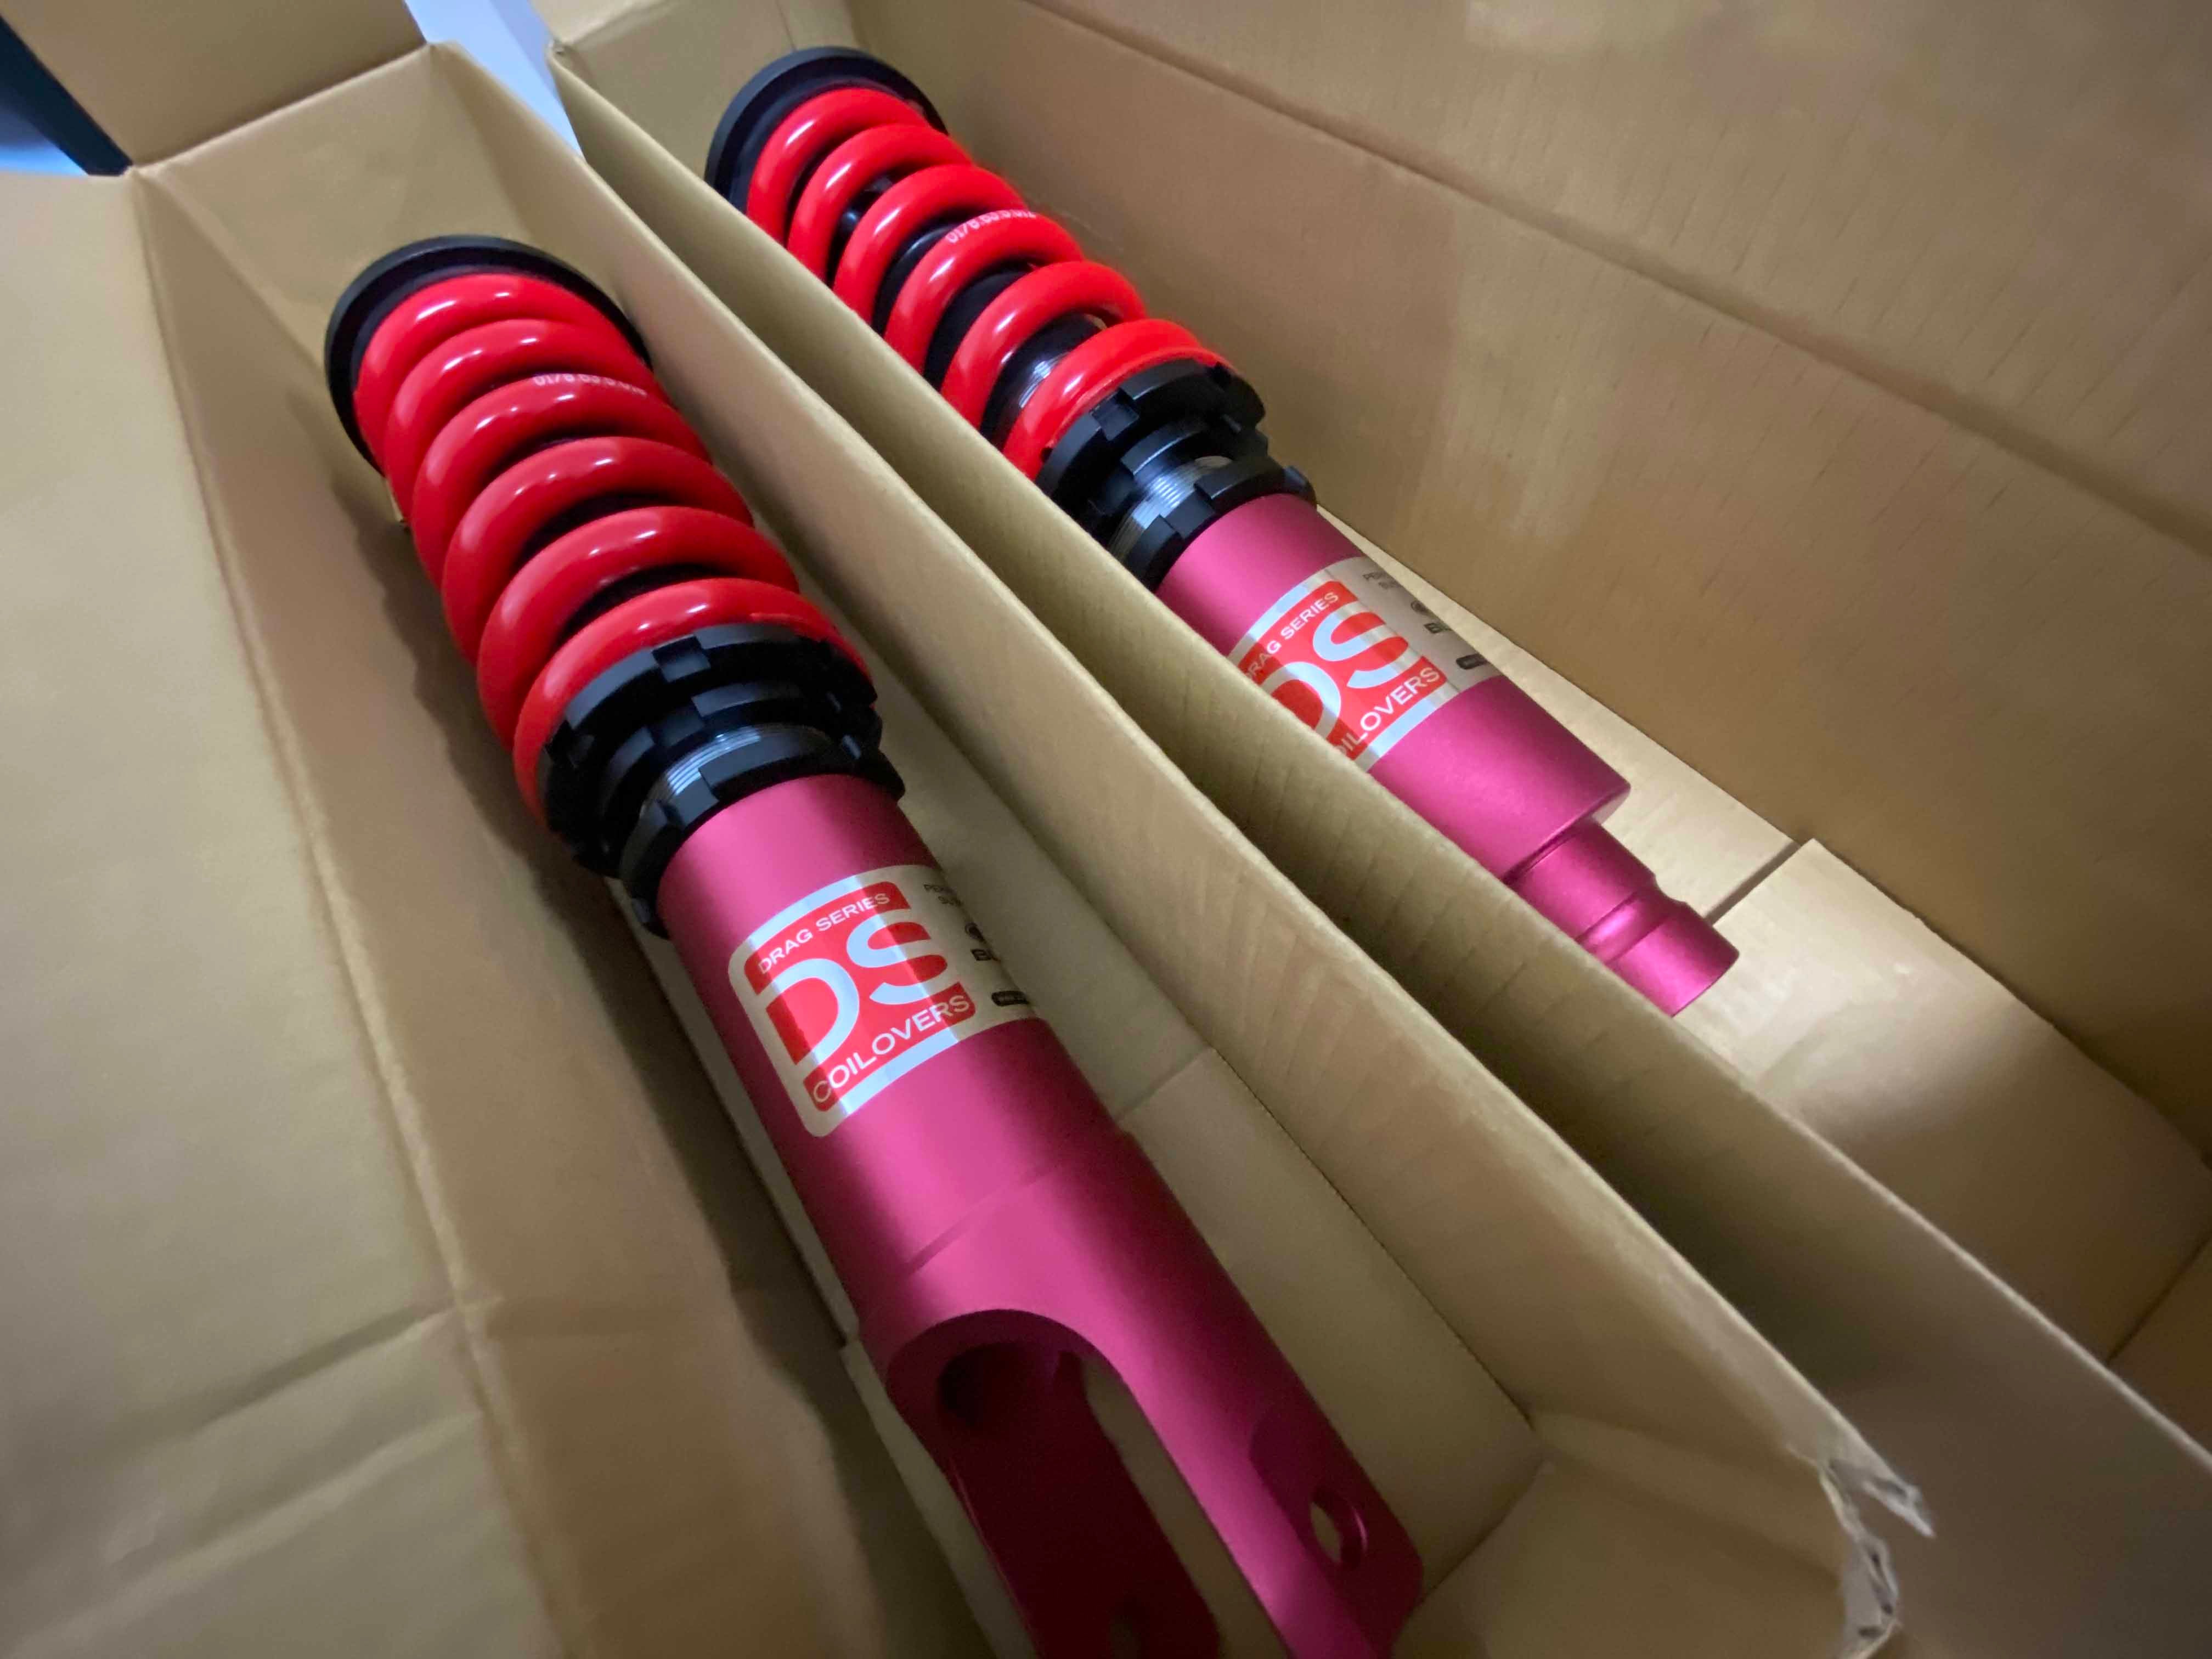 BLOX Racing Drag Series Coilovers in a box